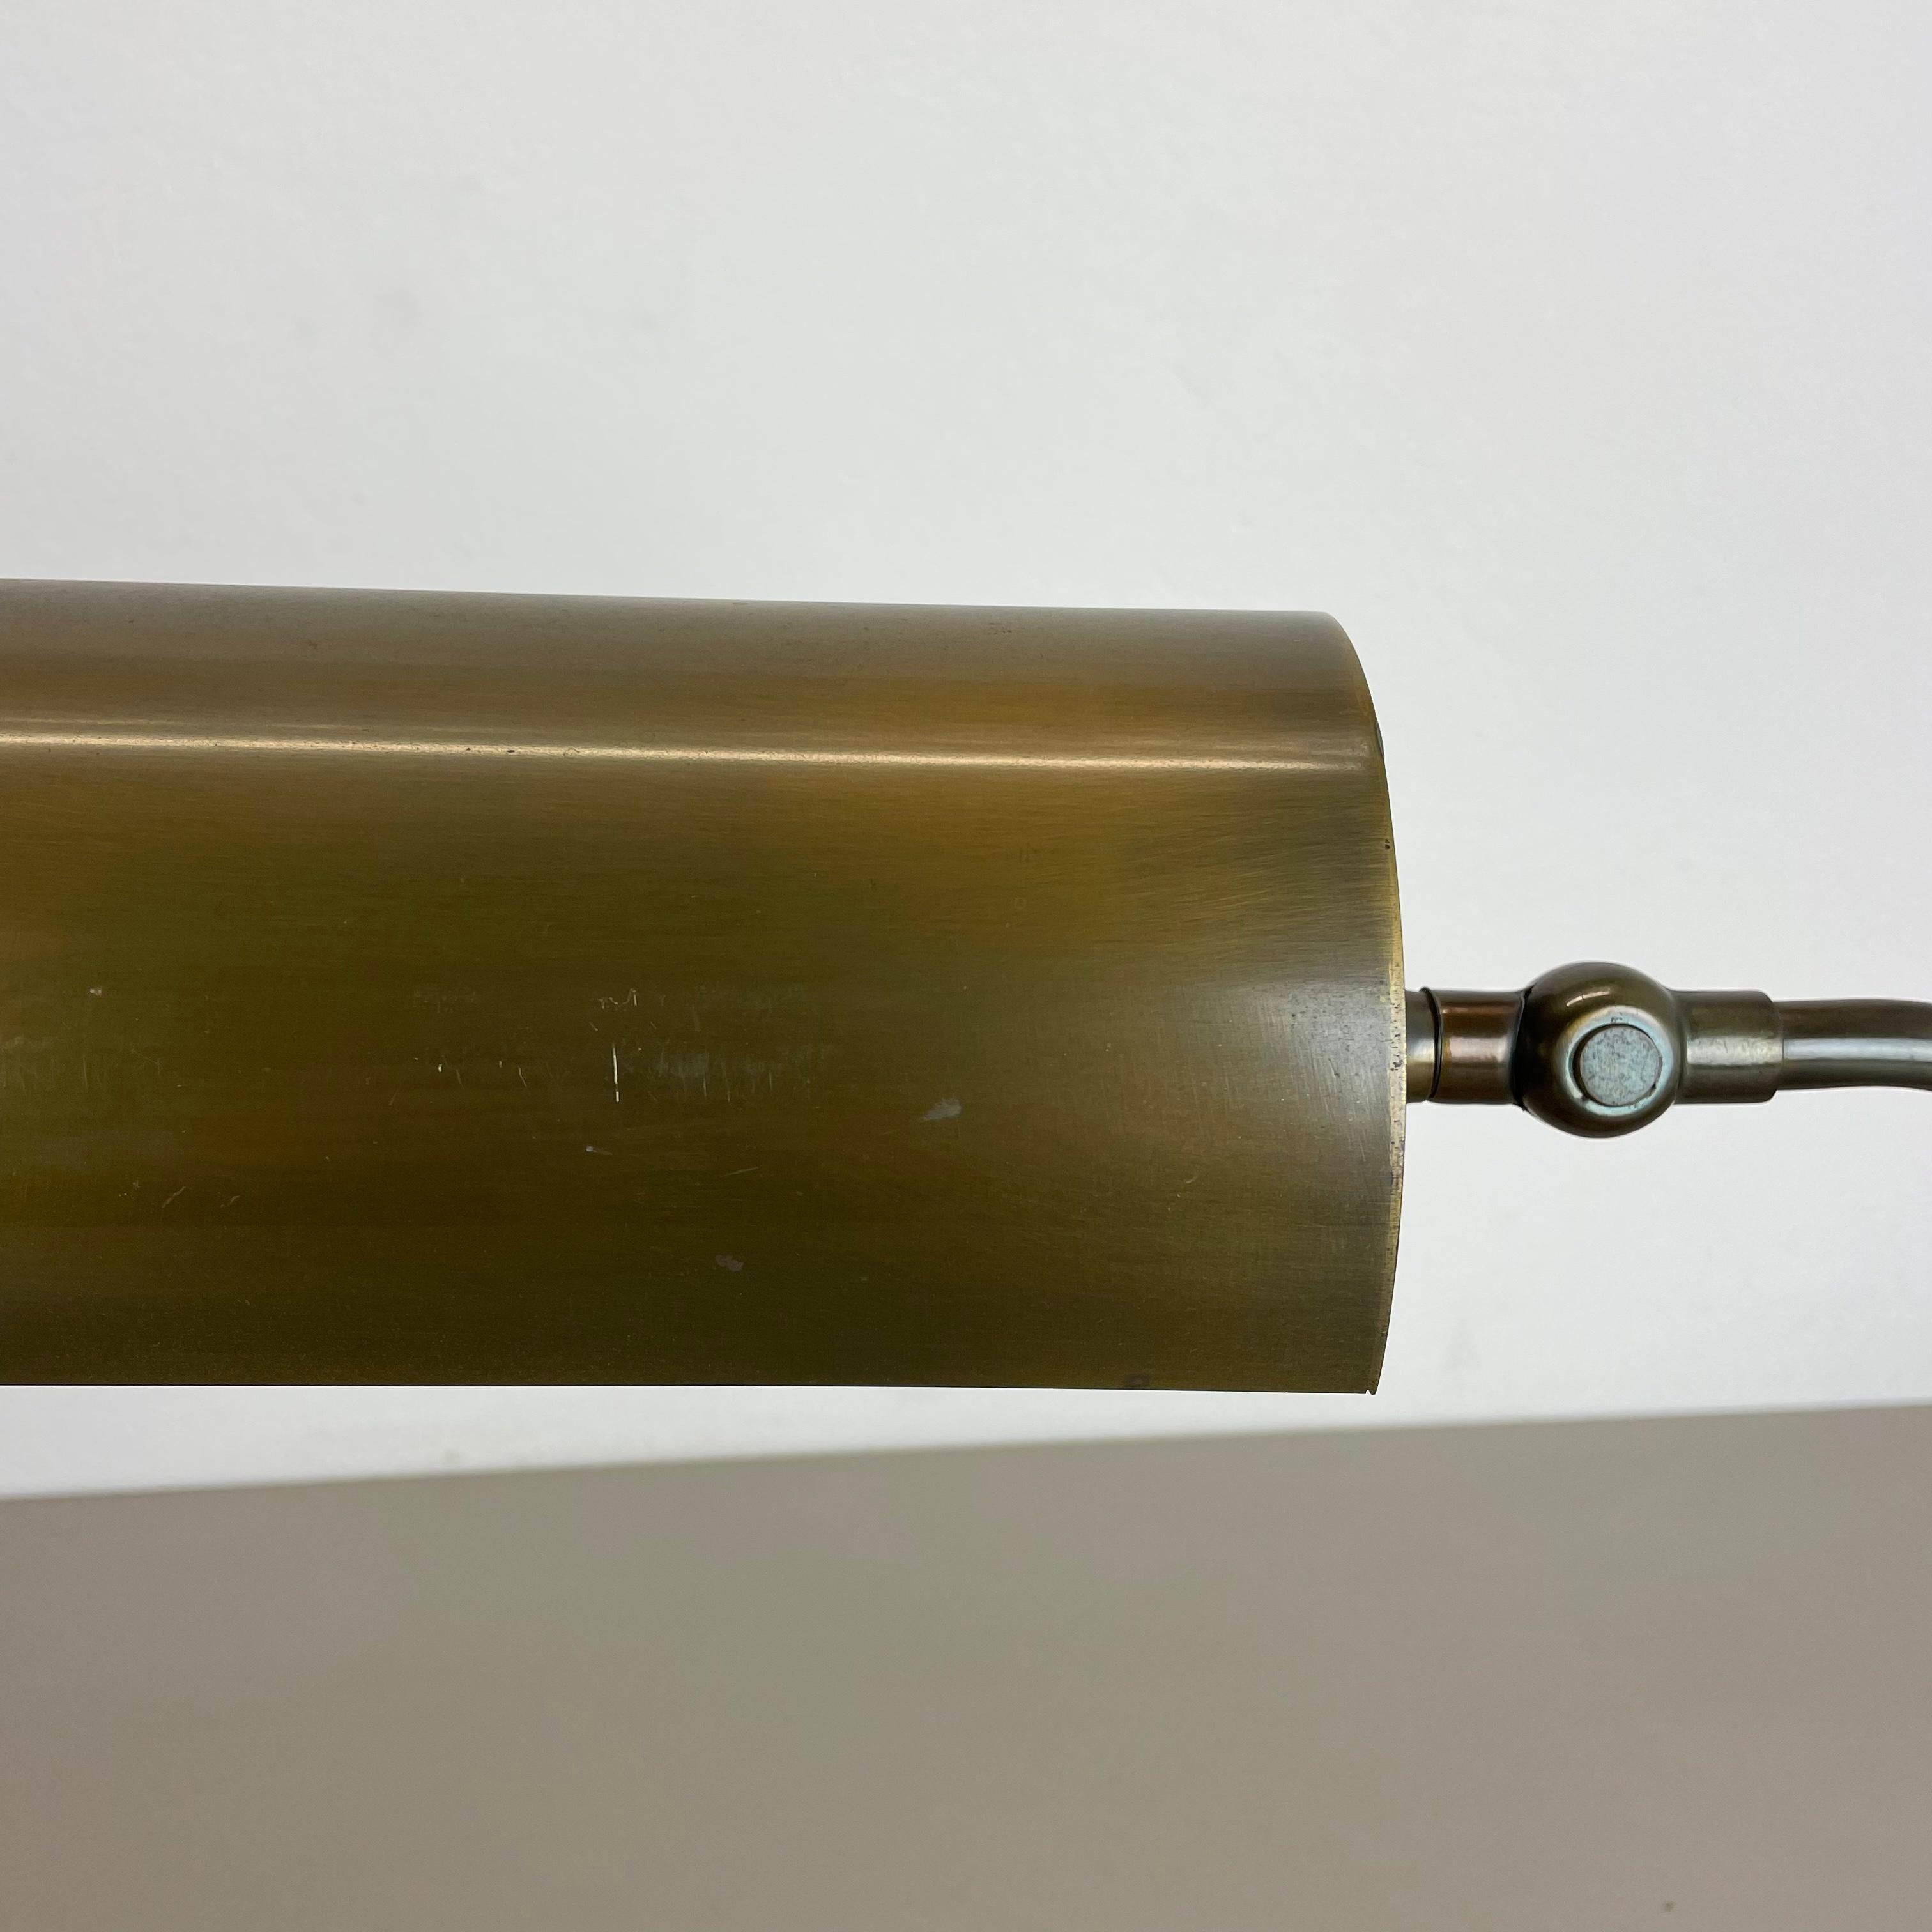 Beautiful Cubic Original Modernist Brass Metal Table Light, Germany, 1970s For Sale 5